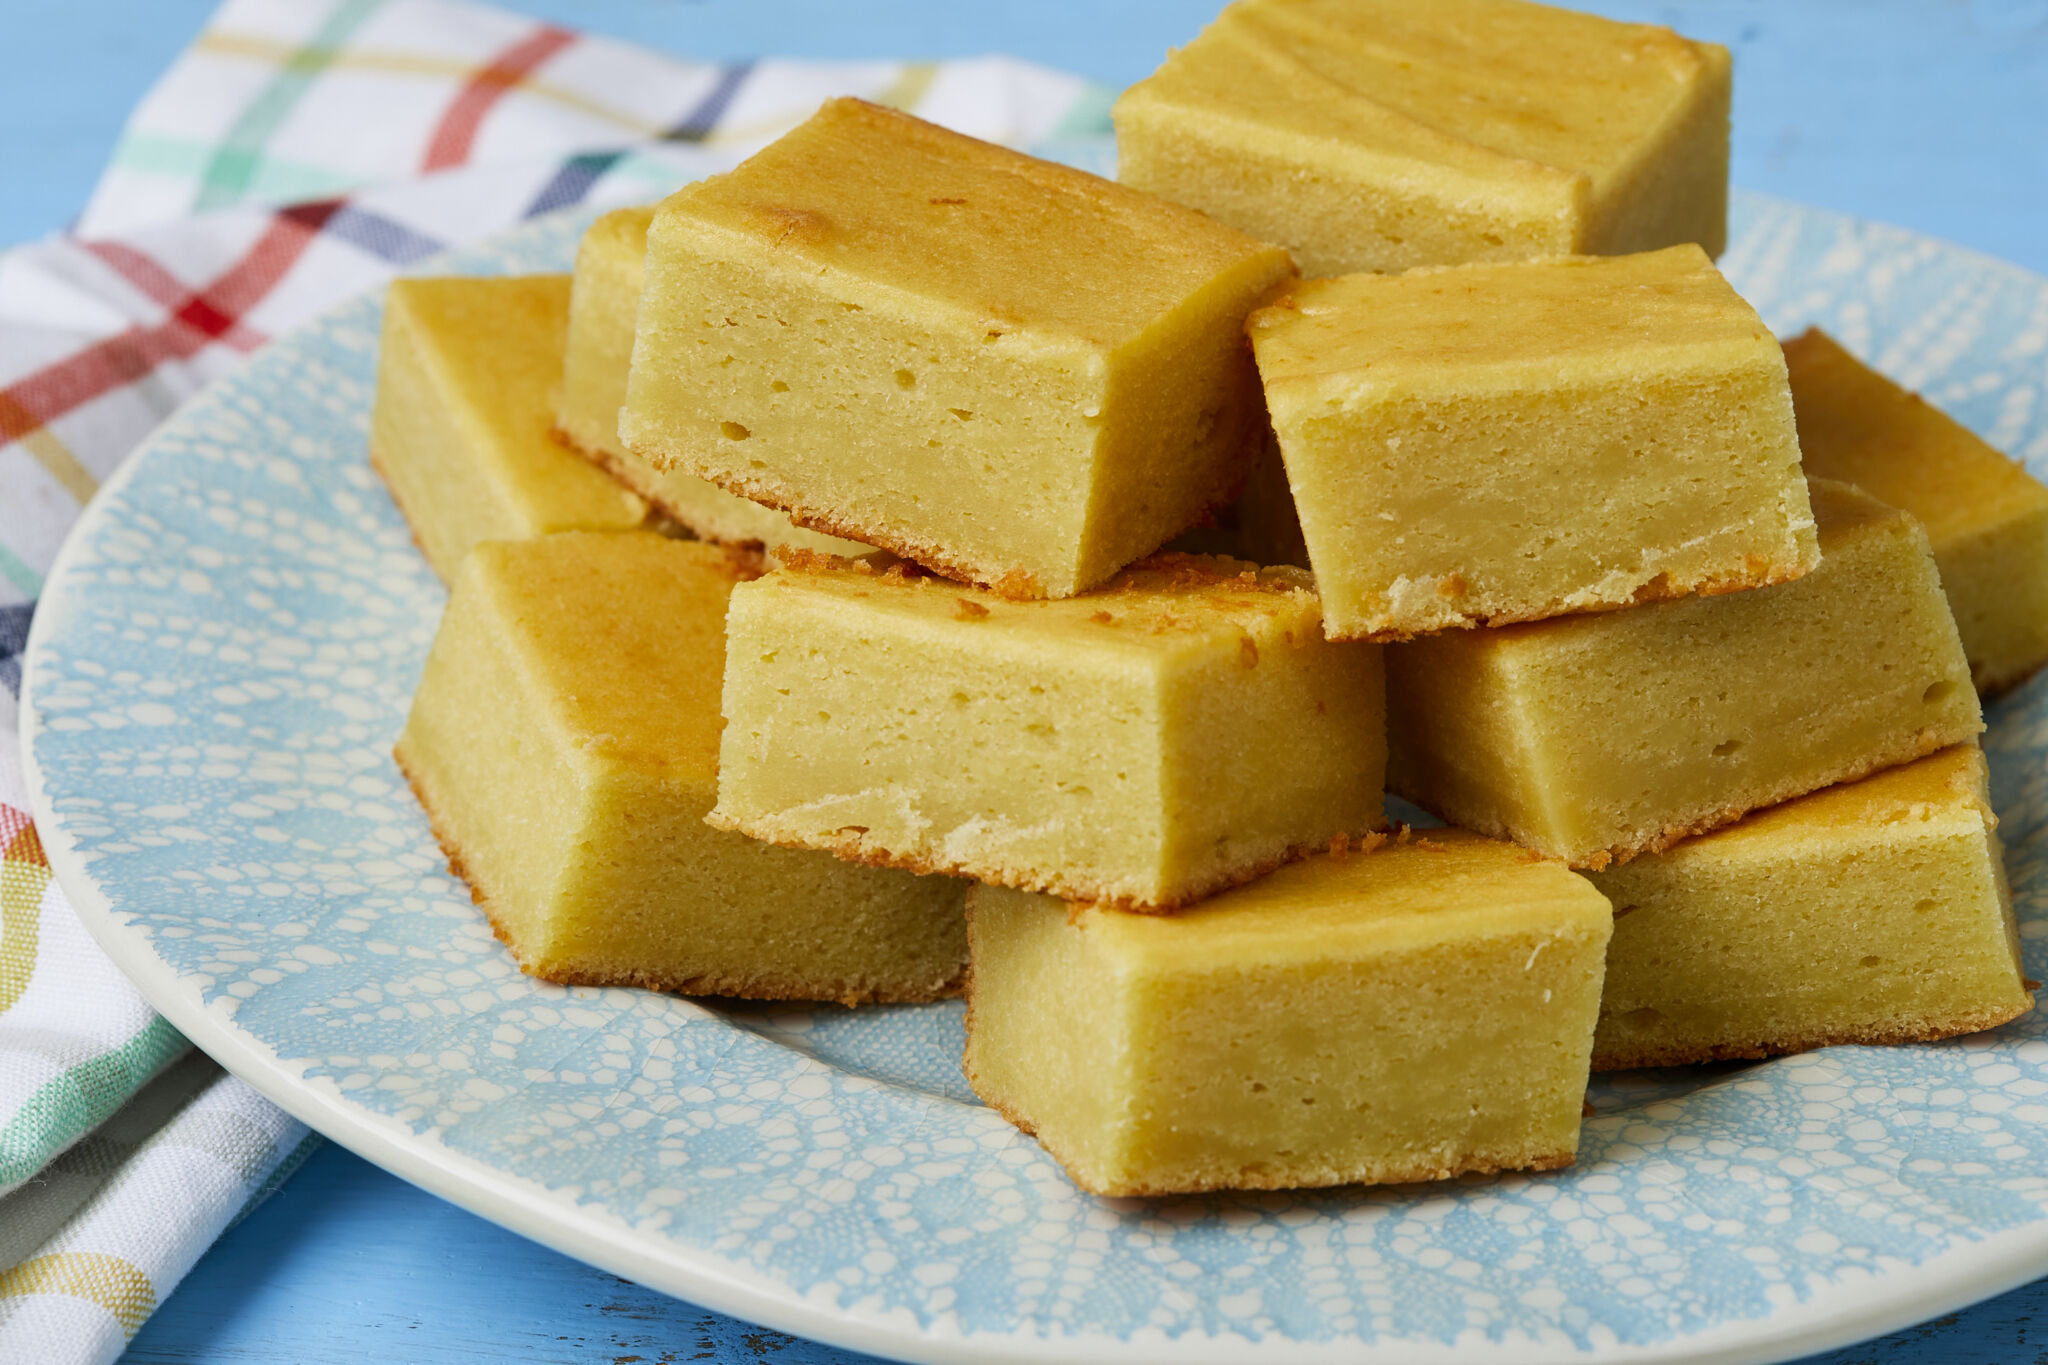 Golden luscious Mango Butter Mochi is piled on a light teal-blue plate, with silky soft texture on top and crispy crust at the bottom.